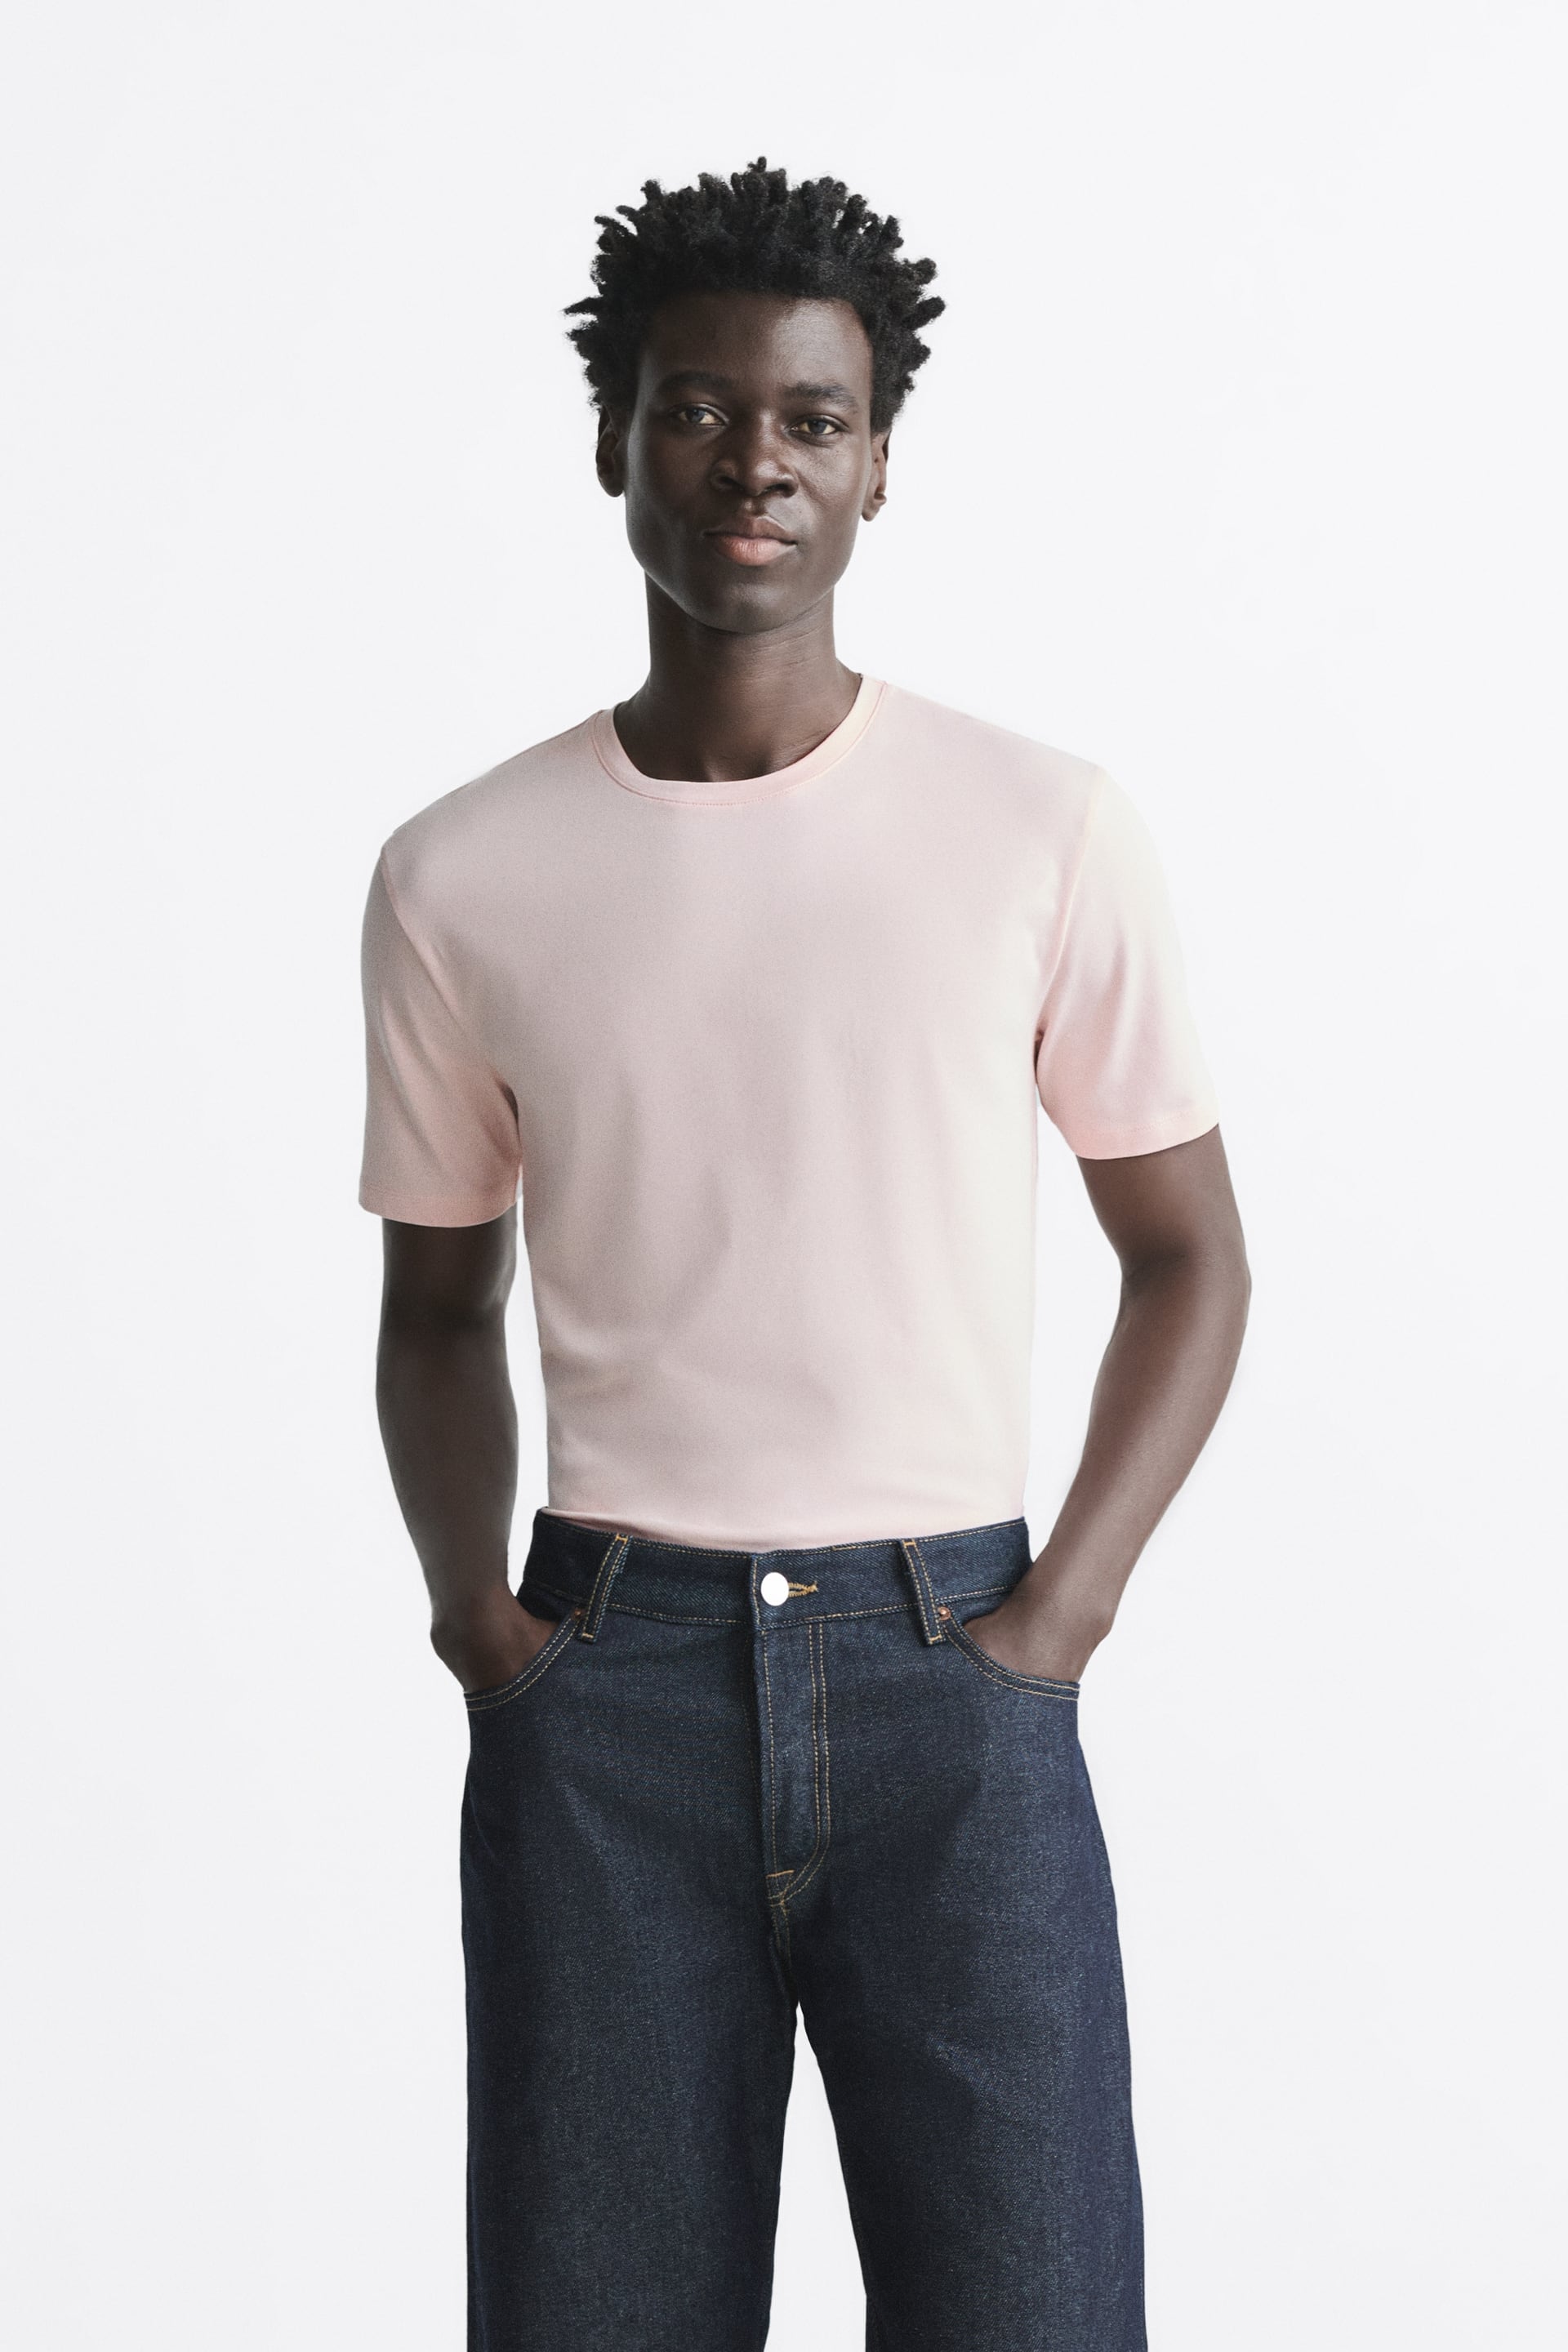 Preferential treatment Snuggle up Suffocate BASIC SLIM FIT T-SHIRT - Pale pink | ZARA United States